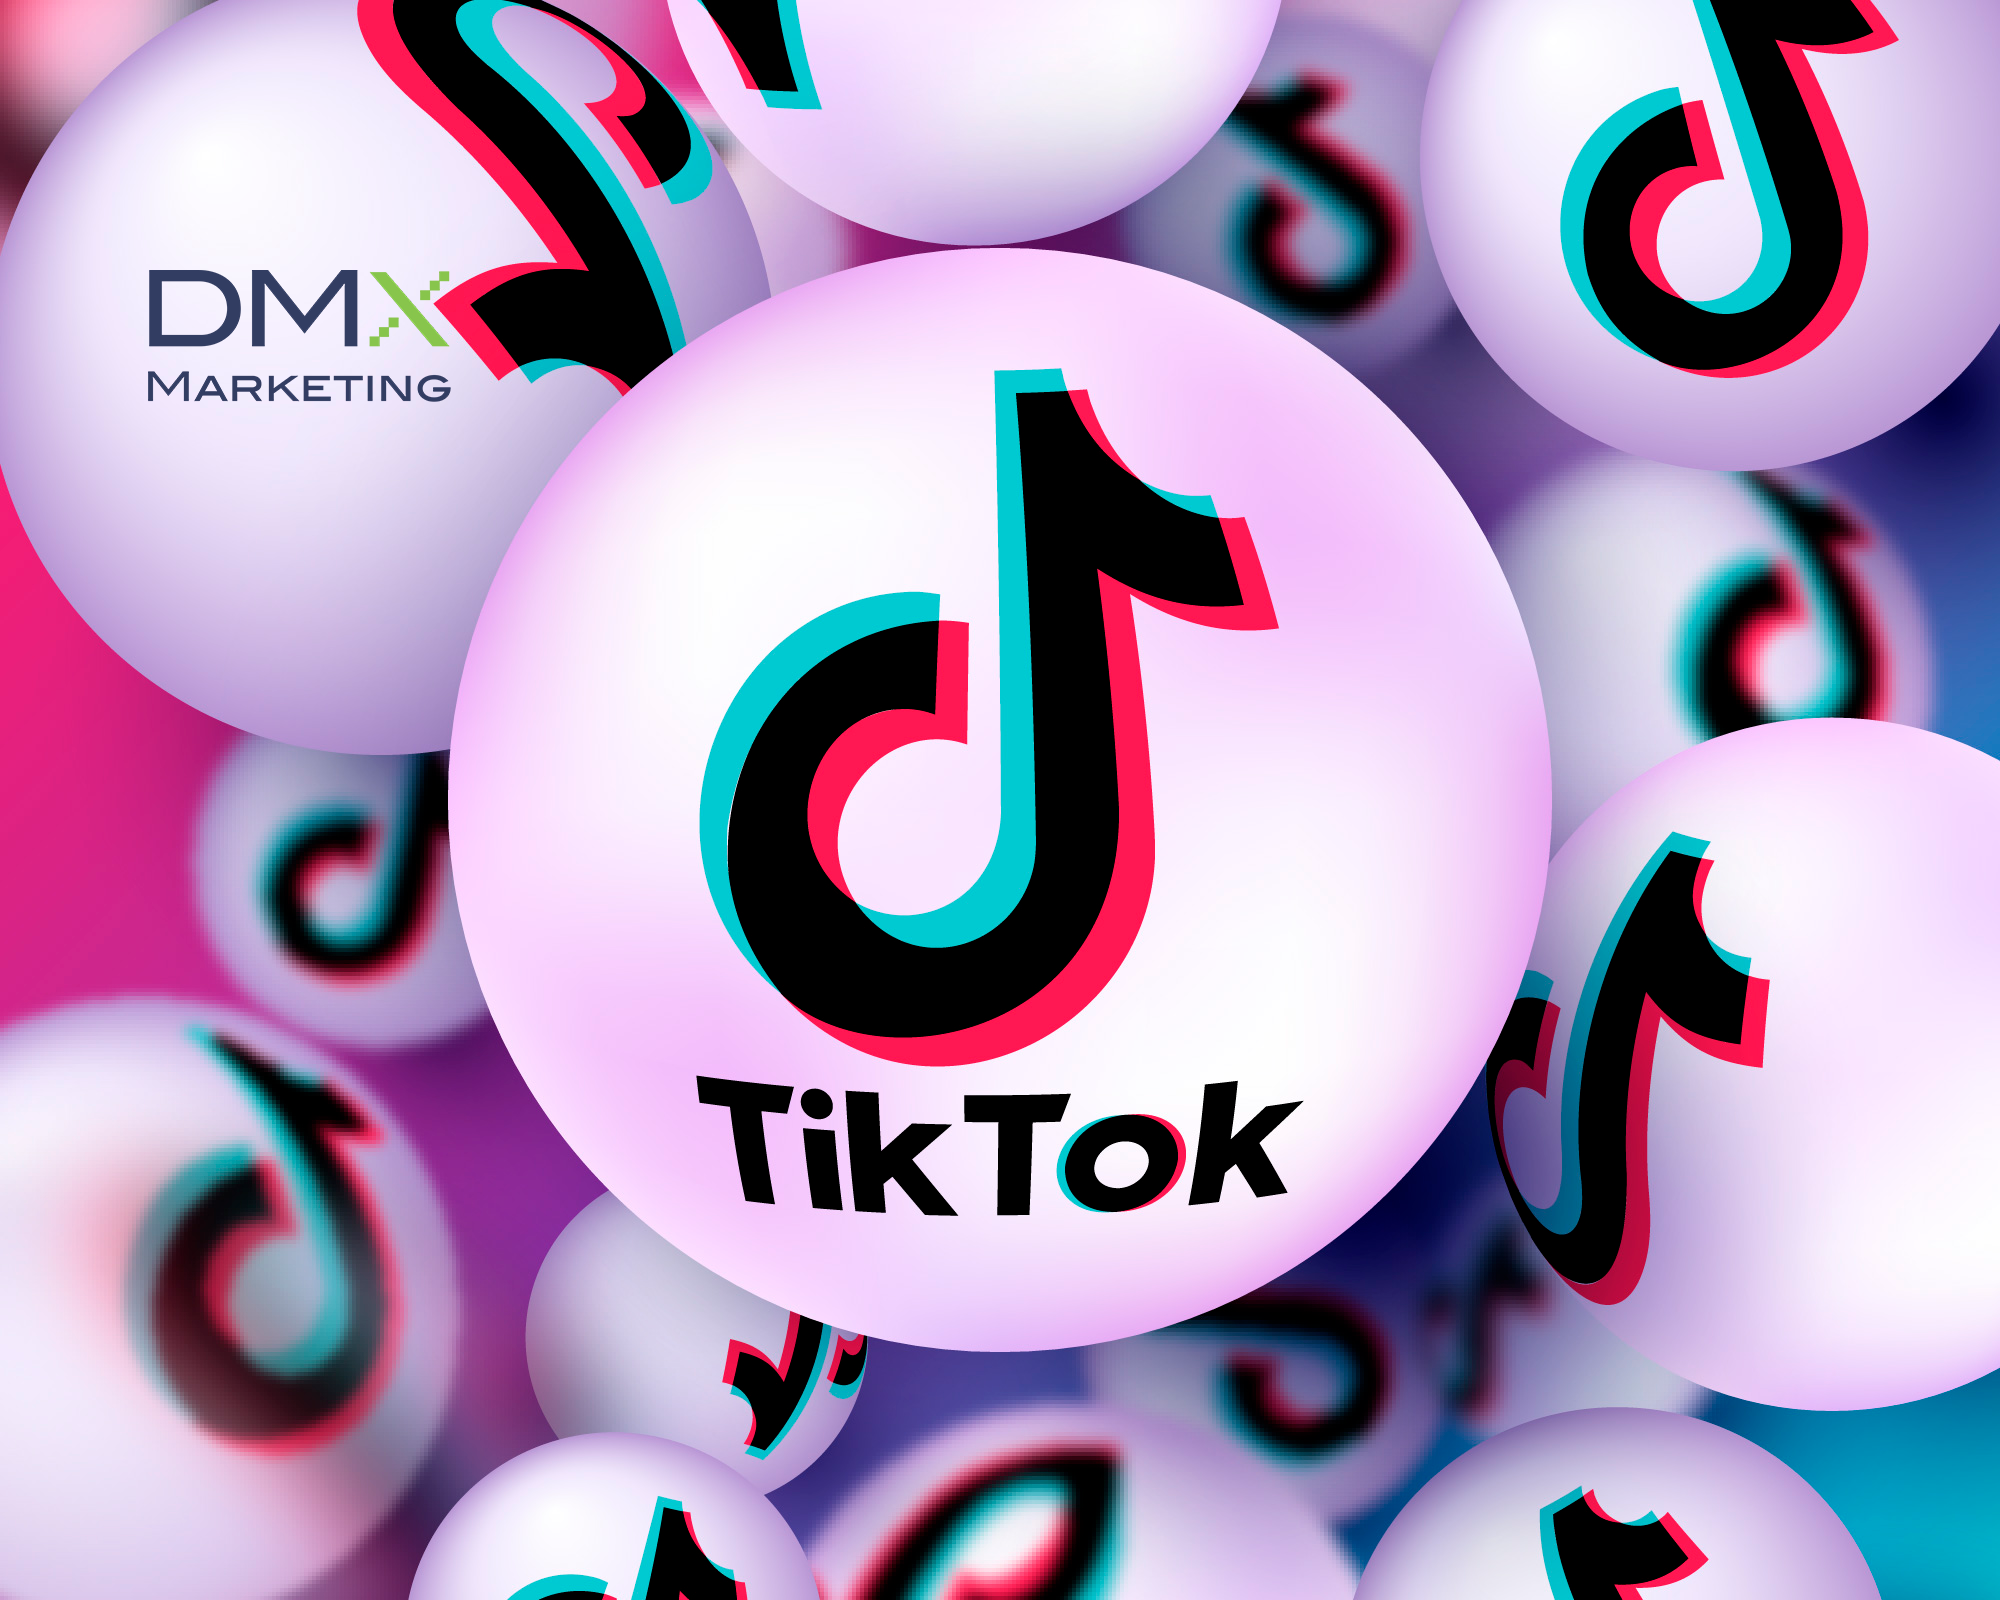 Creative Codes for Advertising on TikTok's Impactful Content